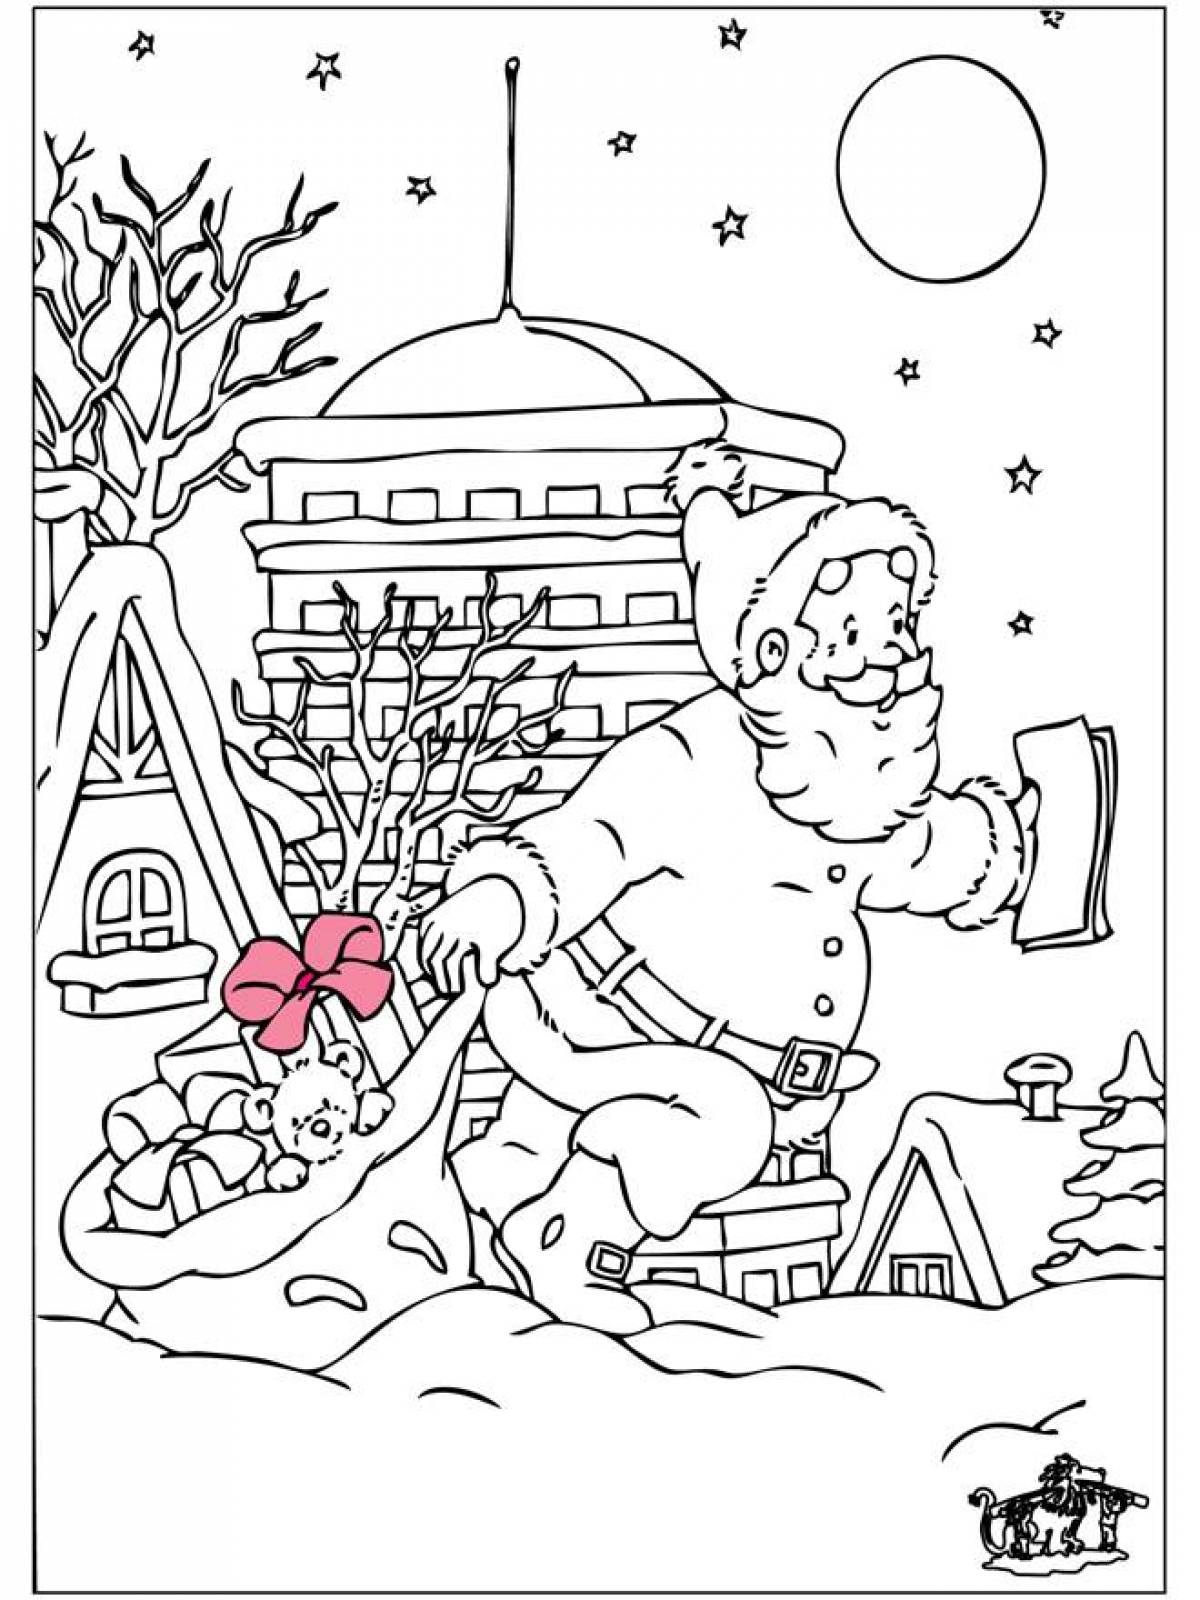 Joyful Christmas coloring book for kids 6-7 years old